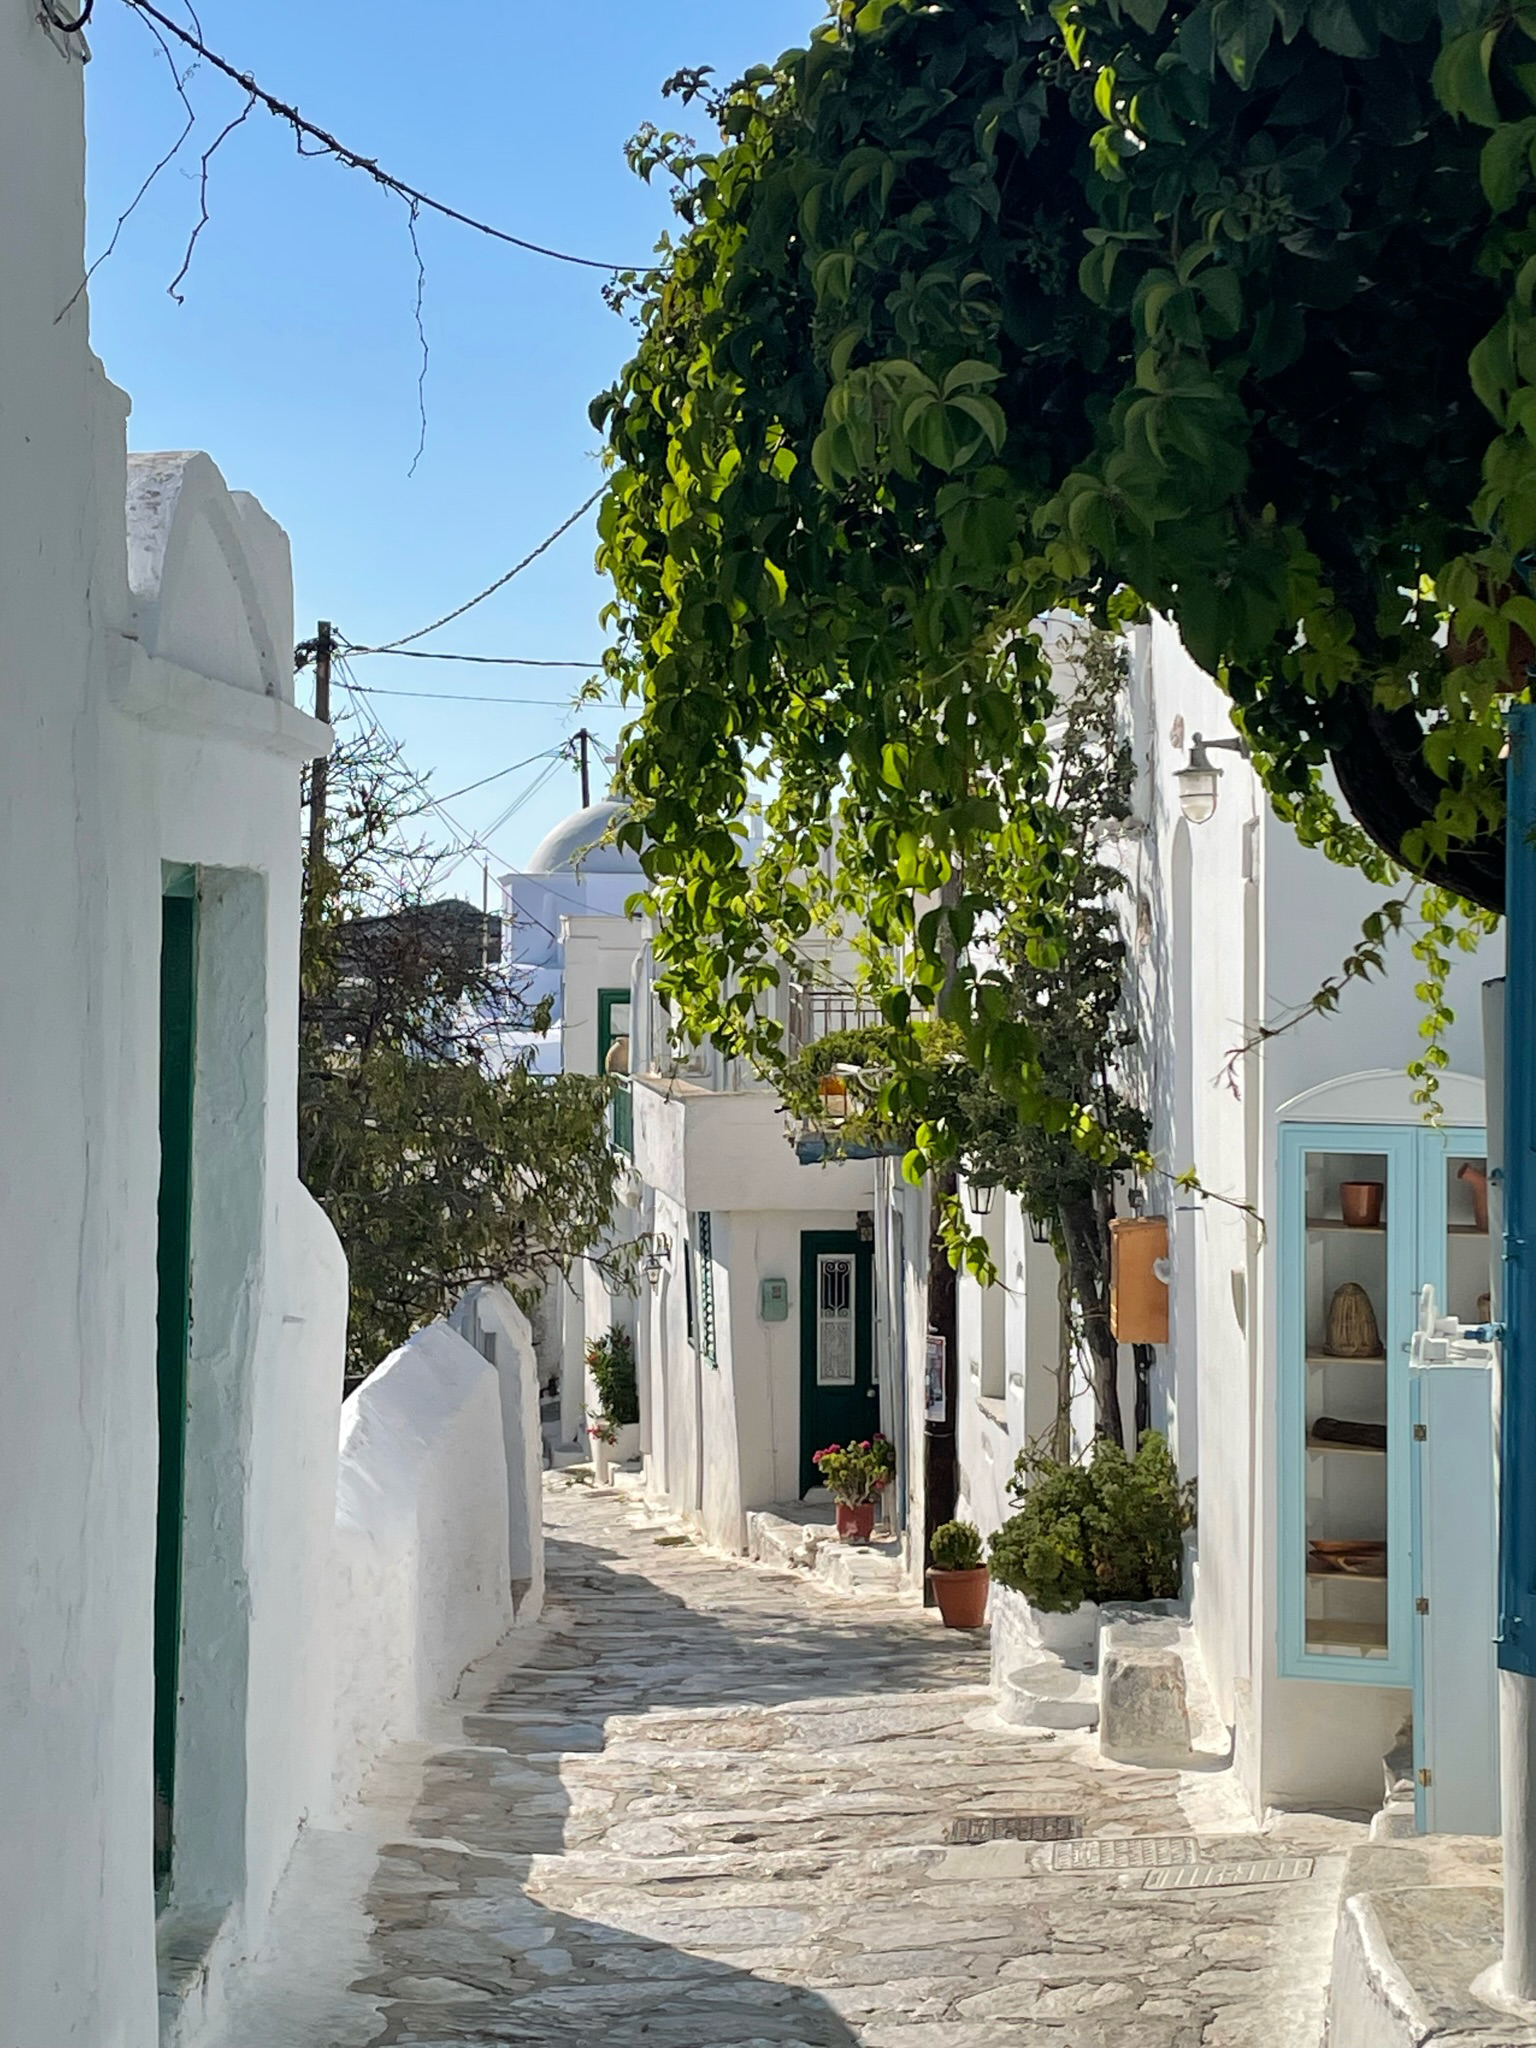 Alley with white houses